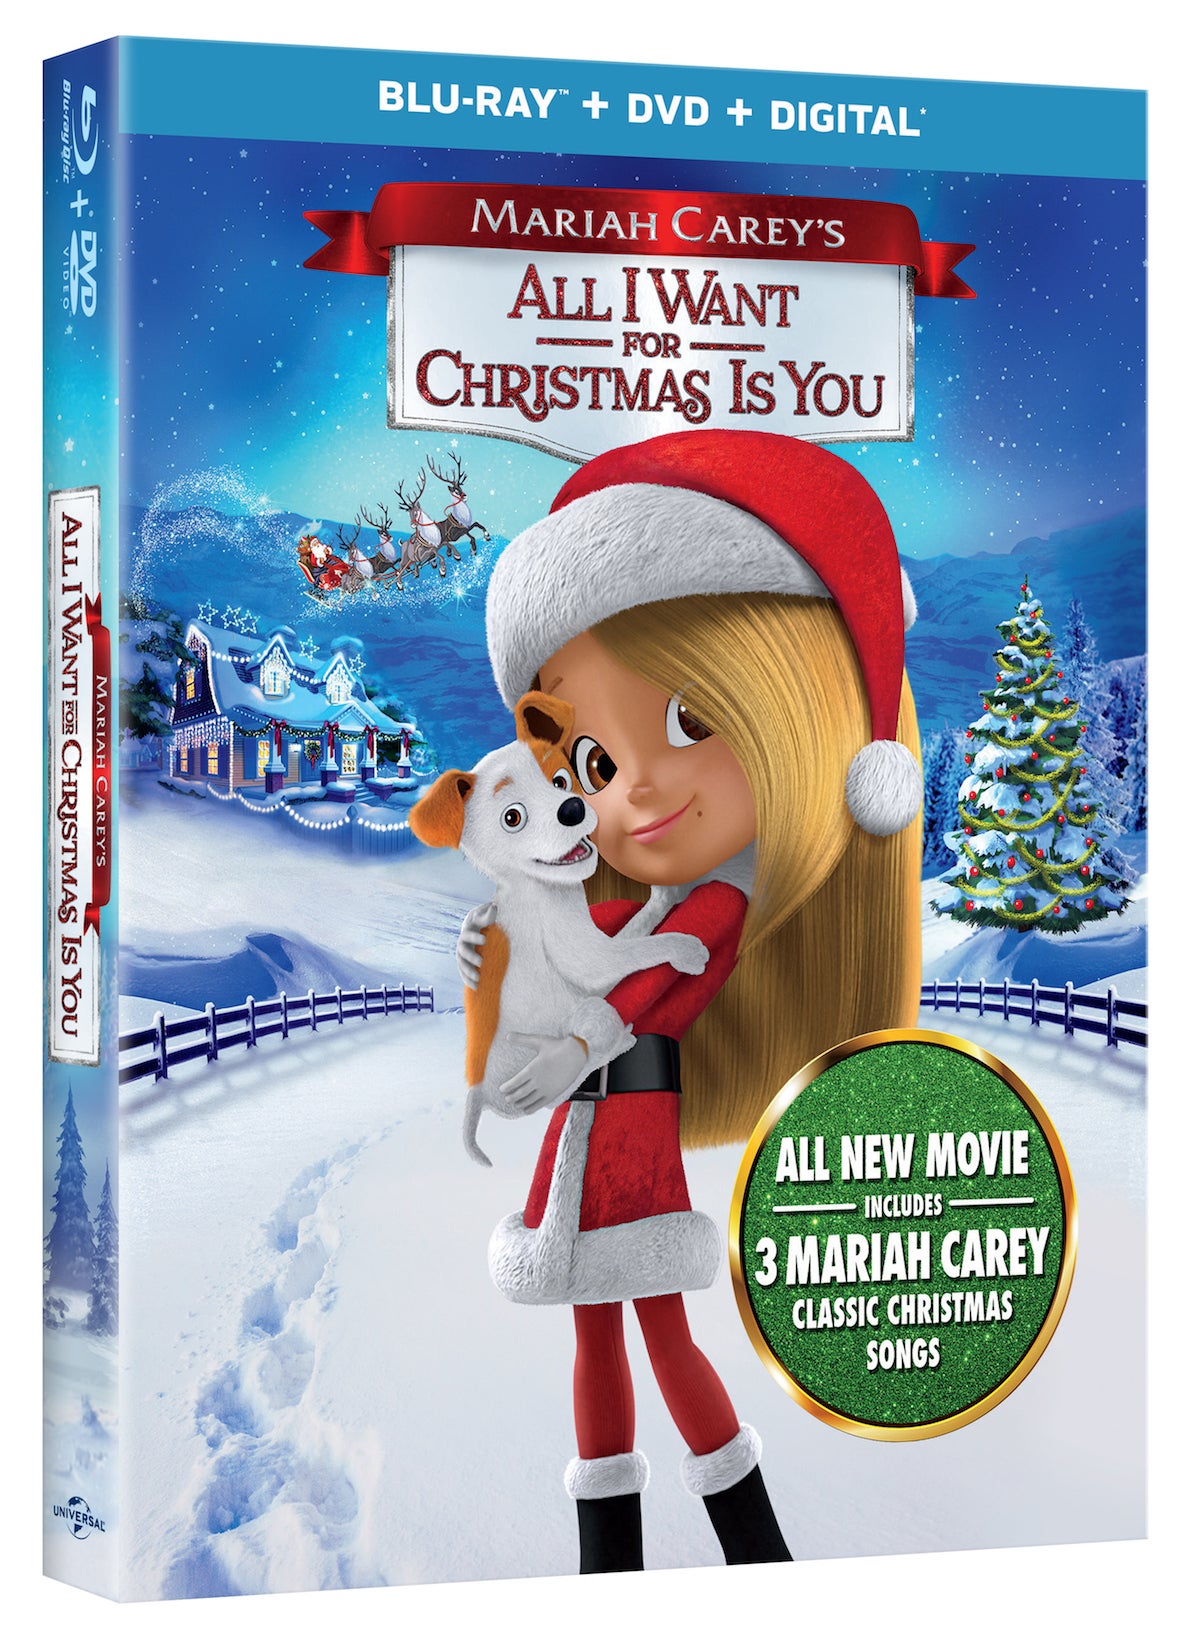 Listen to Mariah Carey's Adorable New Holiday Song in 'All I Want for Christmas Is You' Clip ...